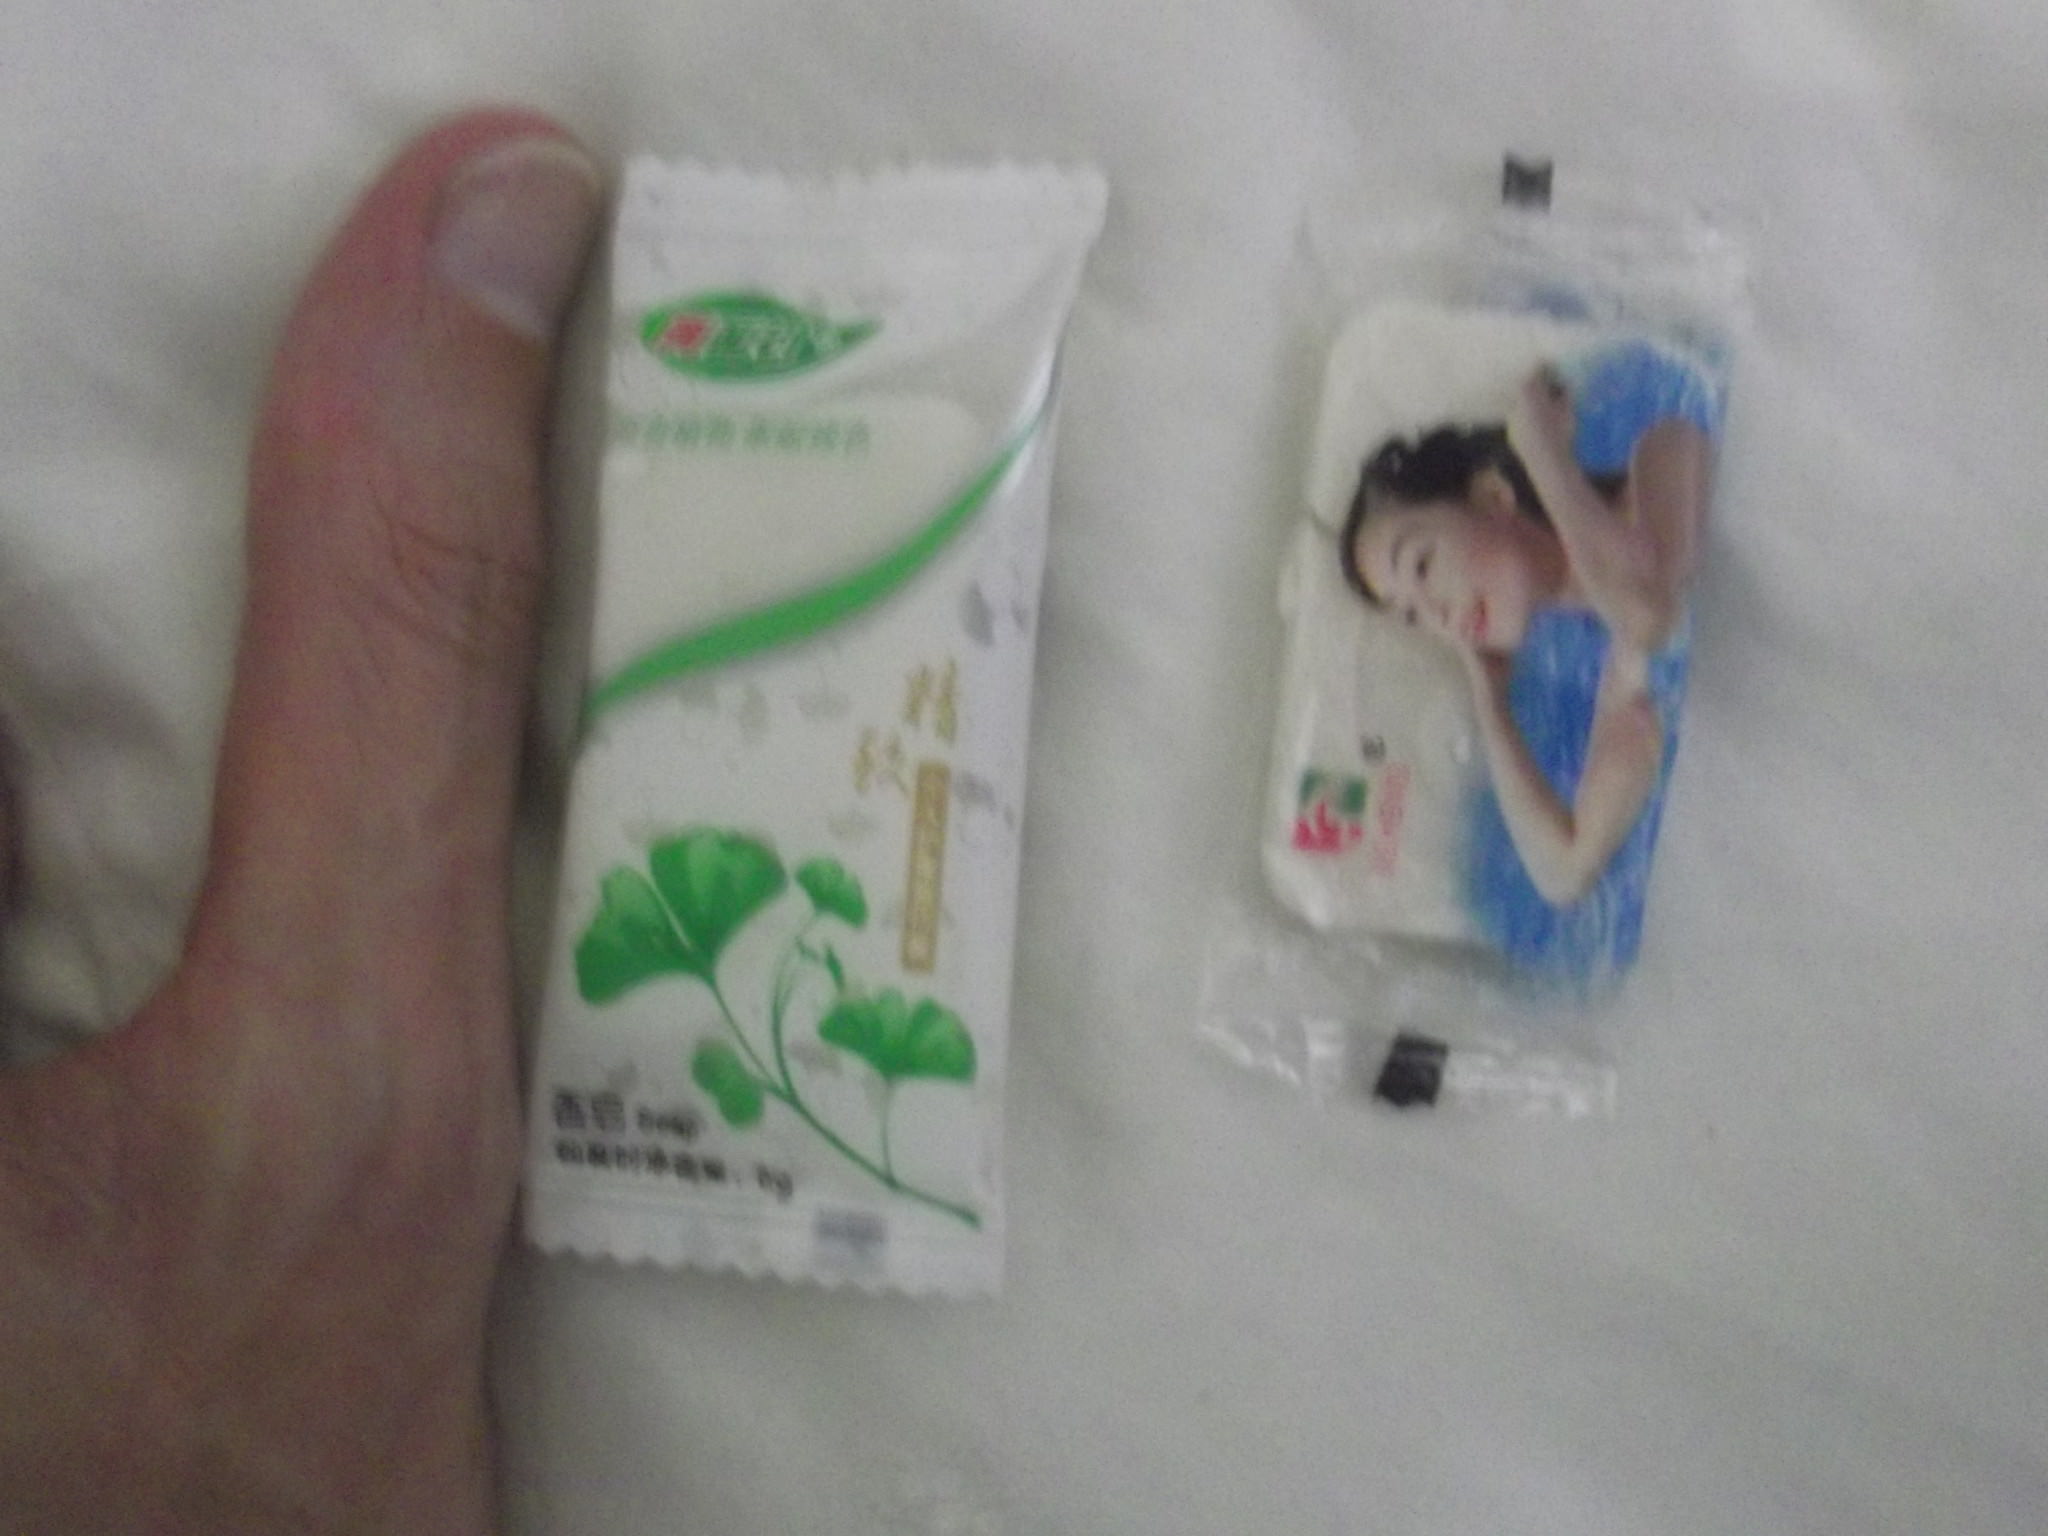 a bar of soap is better than shower gel for travelling